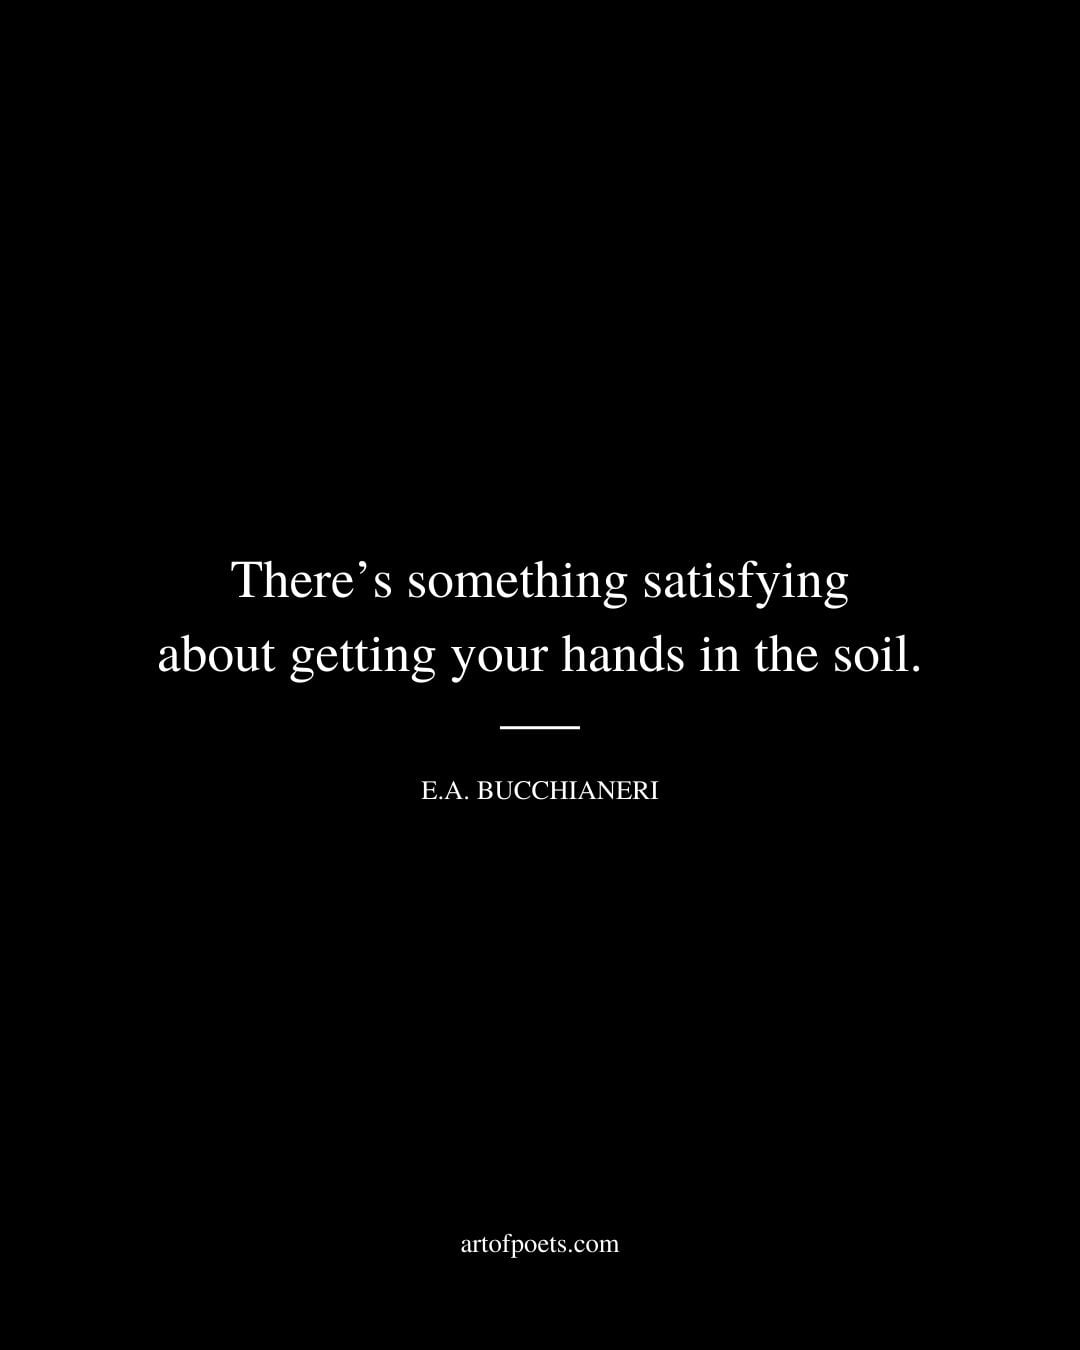 Theres something satisfying about getting your hands in the soil. – E.A. Bucchianeri